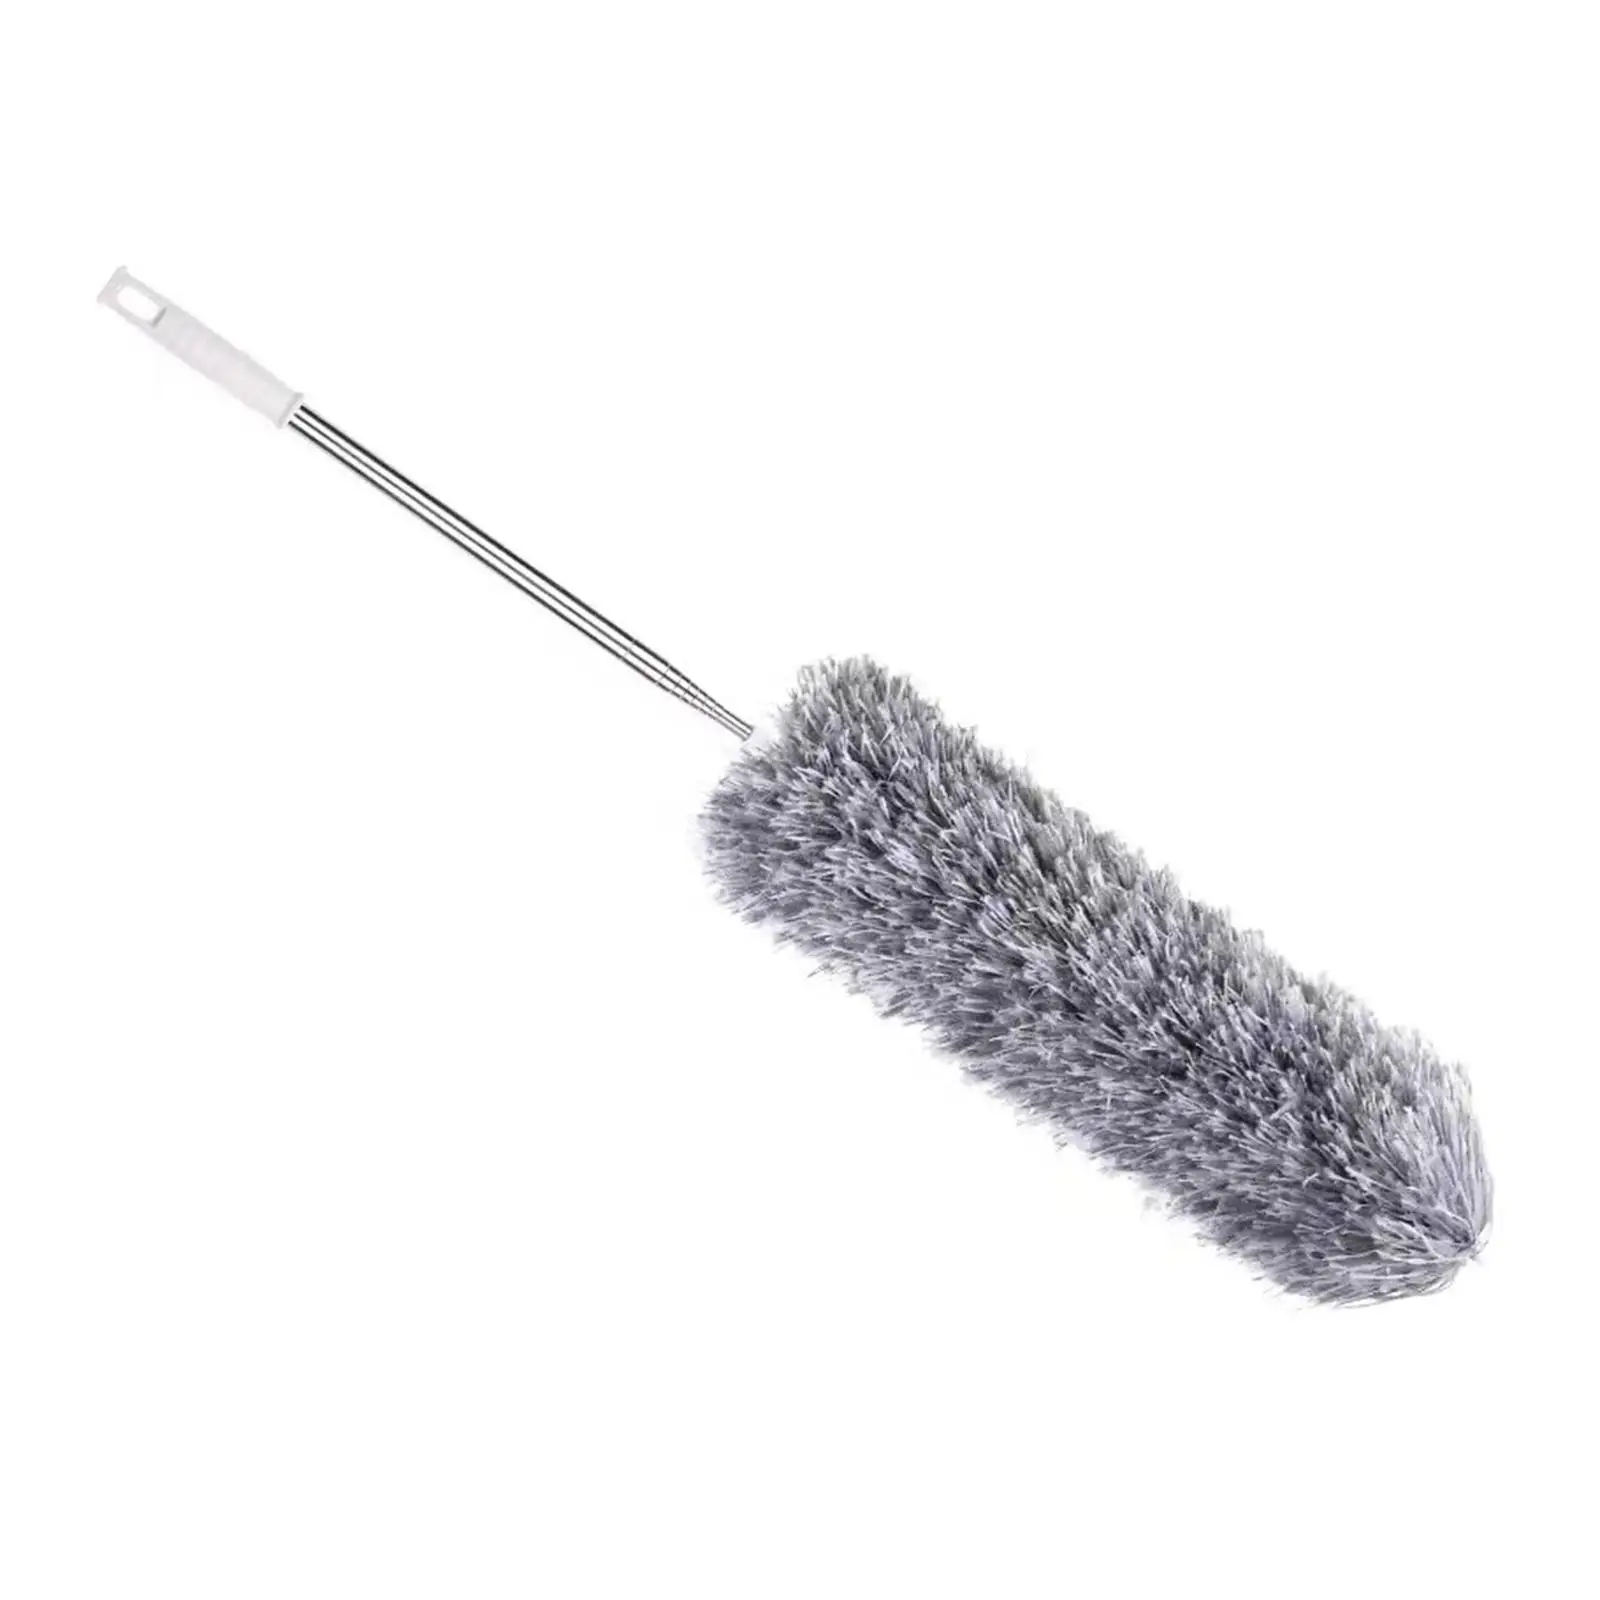 Long Broom Microfiber Duster Long 280cm Telescopic for Cleaning High Ceiling Fan, Furniture, Baseboard Retractable Lint Free